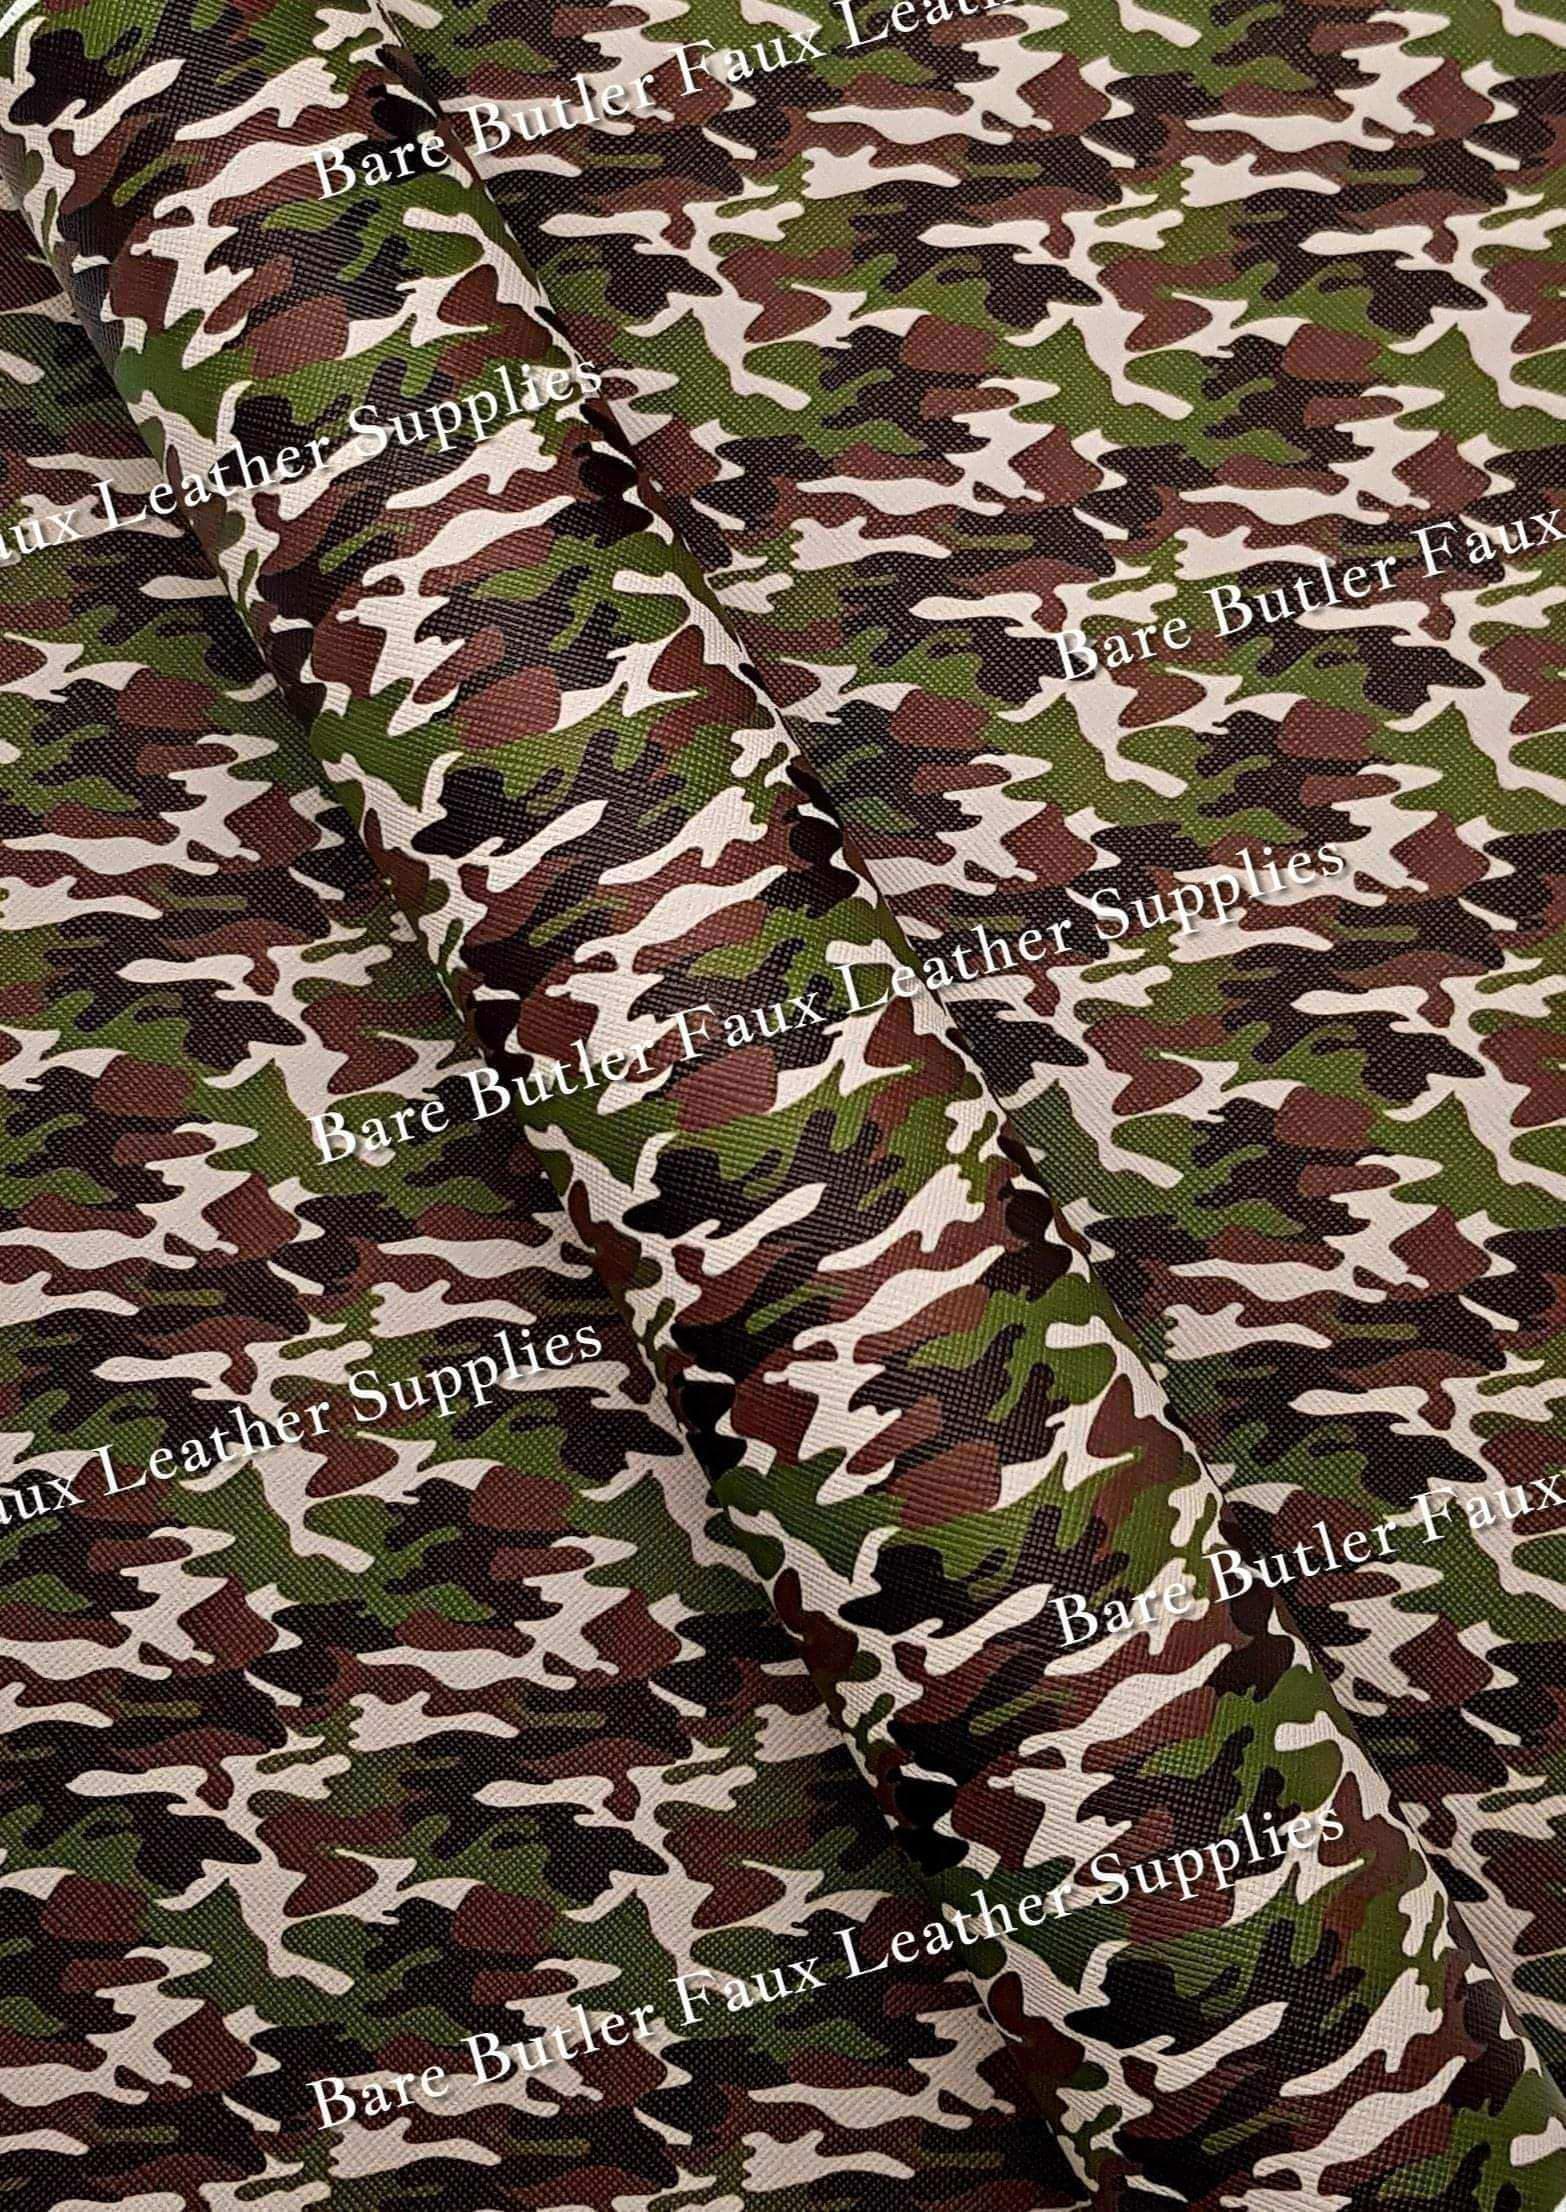 Camo Faux Leather - Army, Camo, Camouflaged, Faux, Faux Leather, green, Leather, Litchi - Bare Butler Faux Leather Supplies 